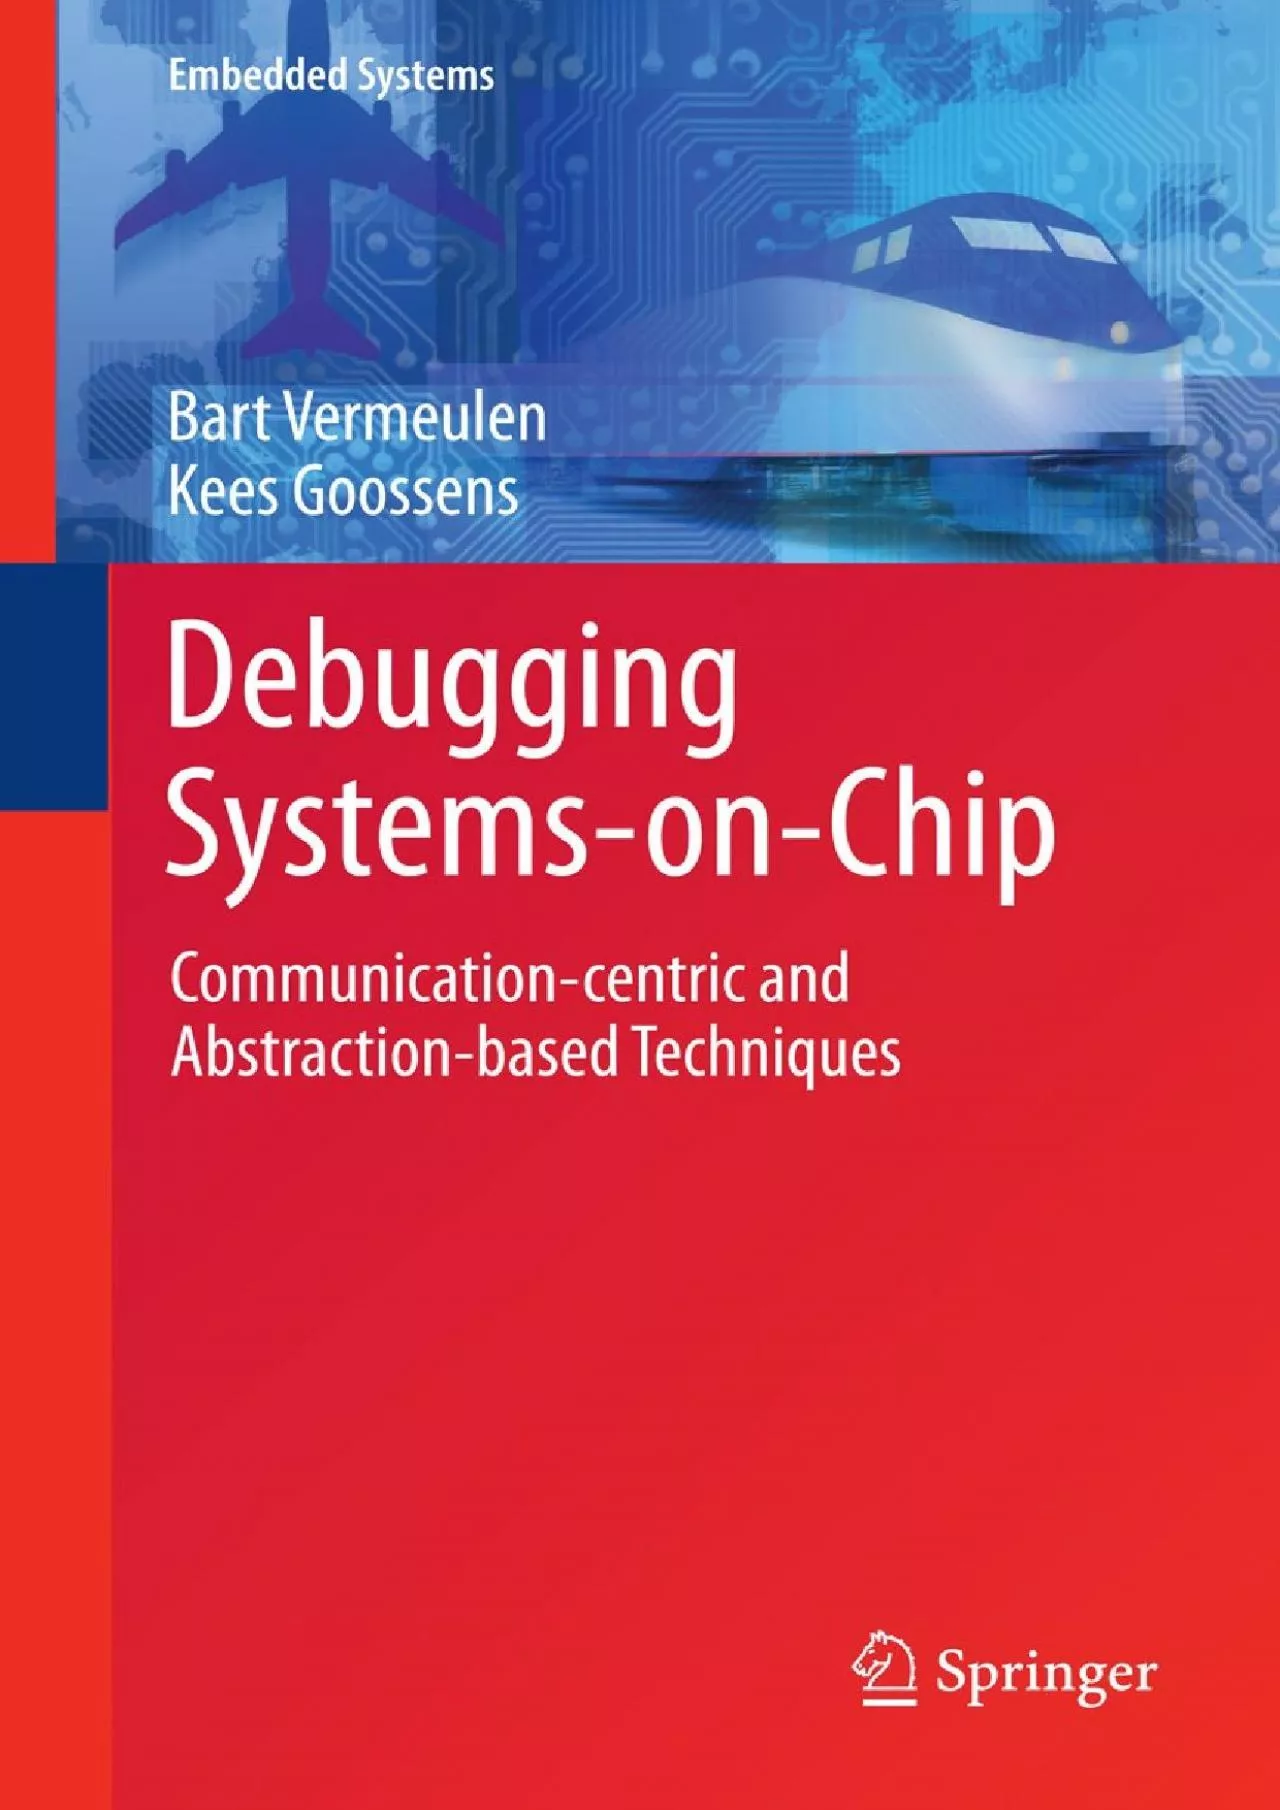 [DOWLOAD]-Debugging Systems-on-Chip: Communication-centric and Abstraction-based Techniques